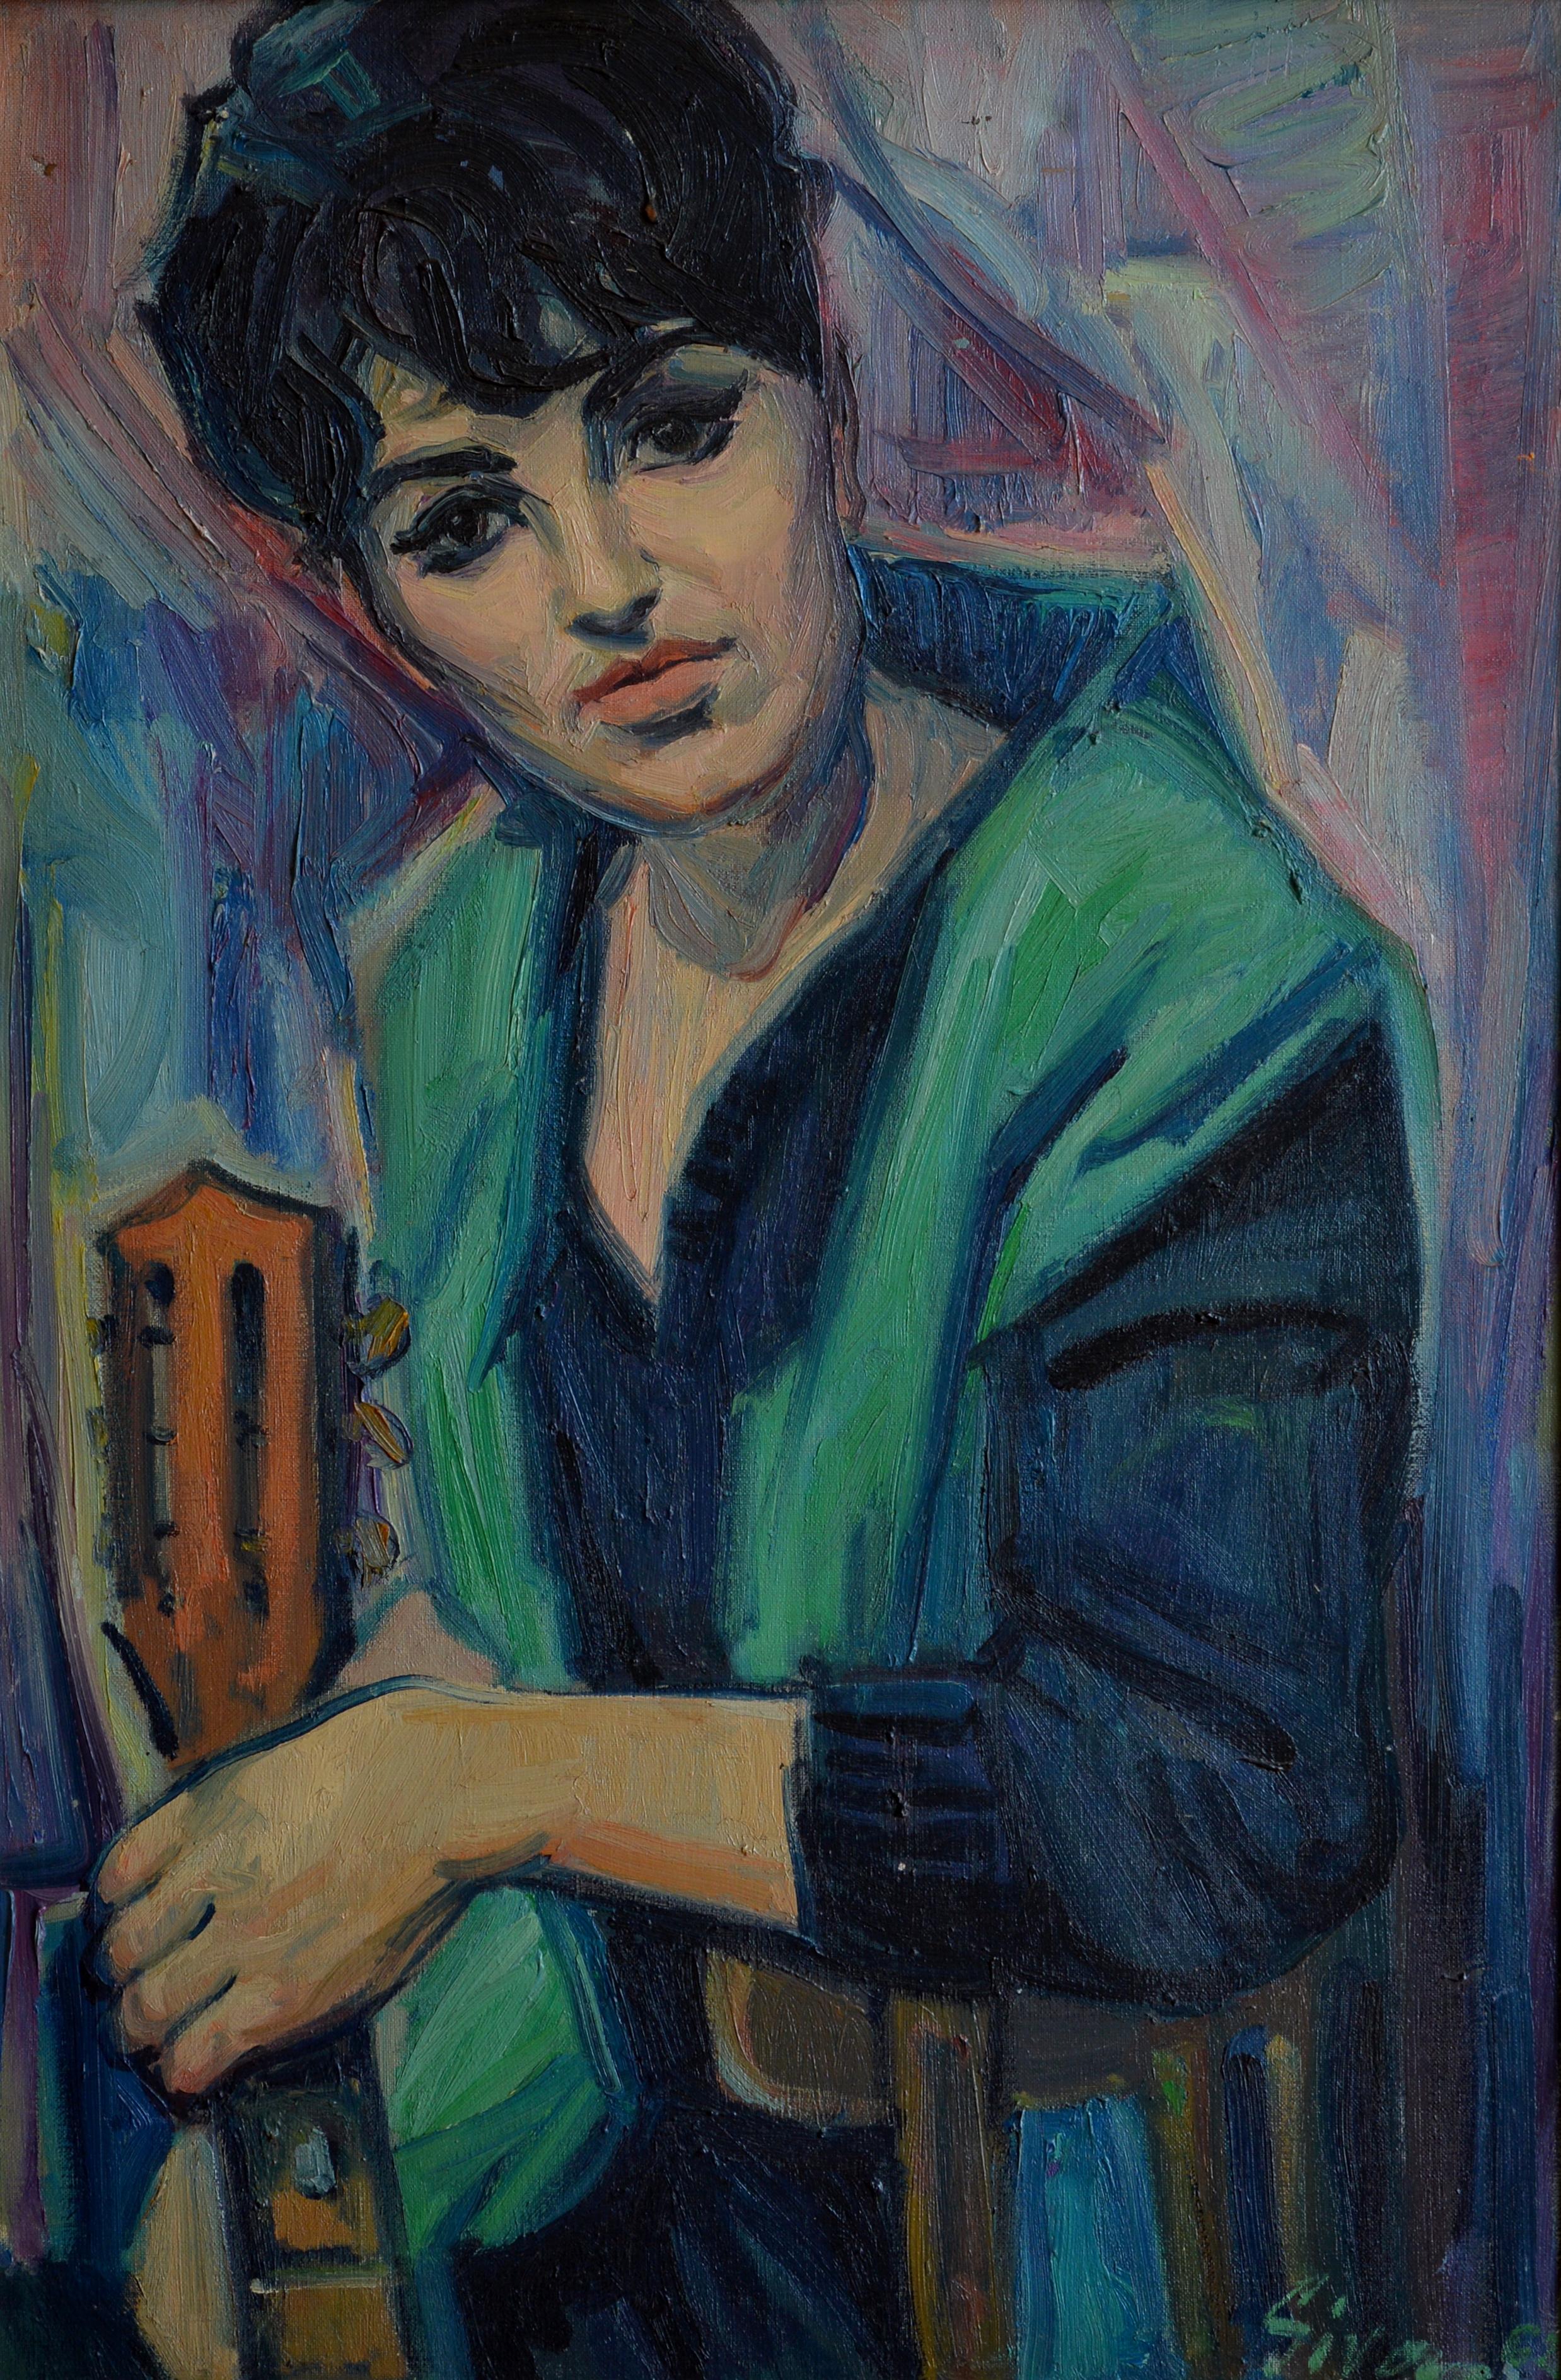 School of Paris, Barbara, Oil on Canvas, 1950s - Painting by Unknown